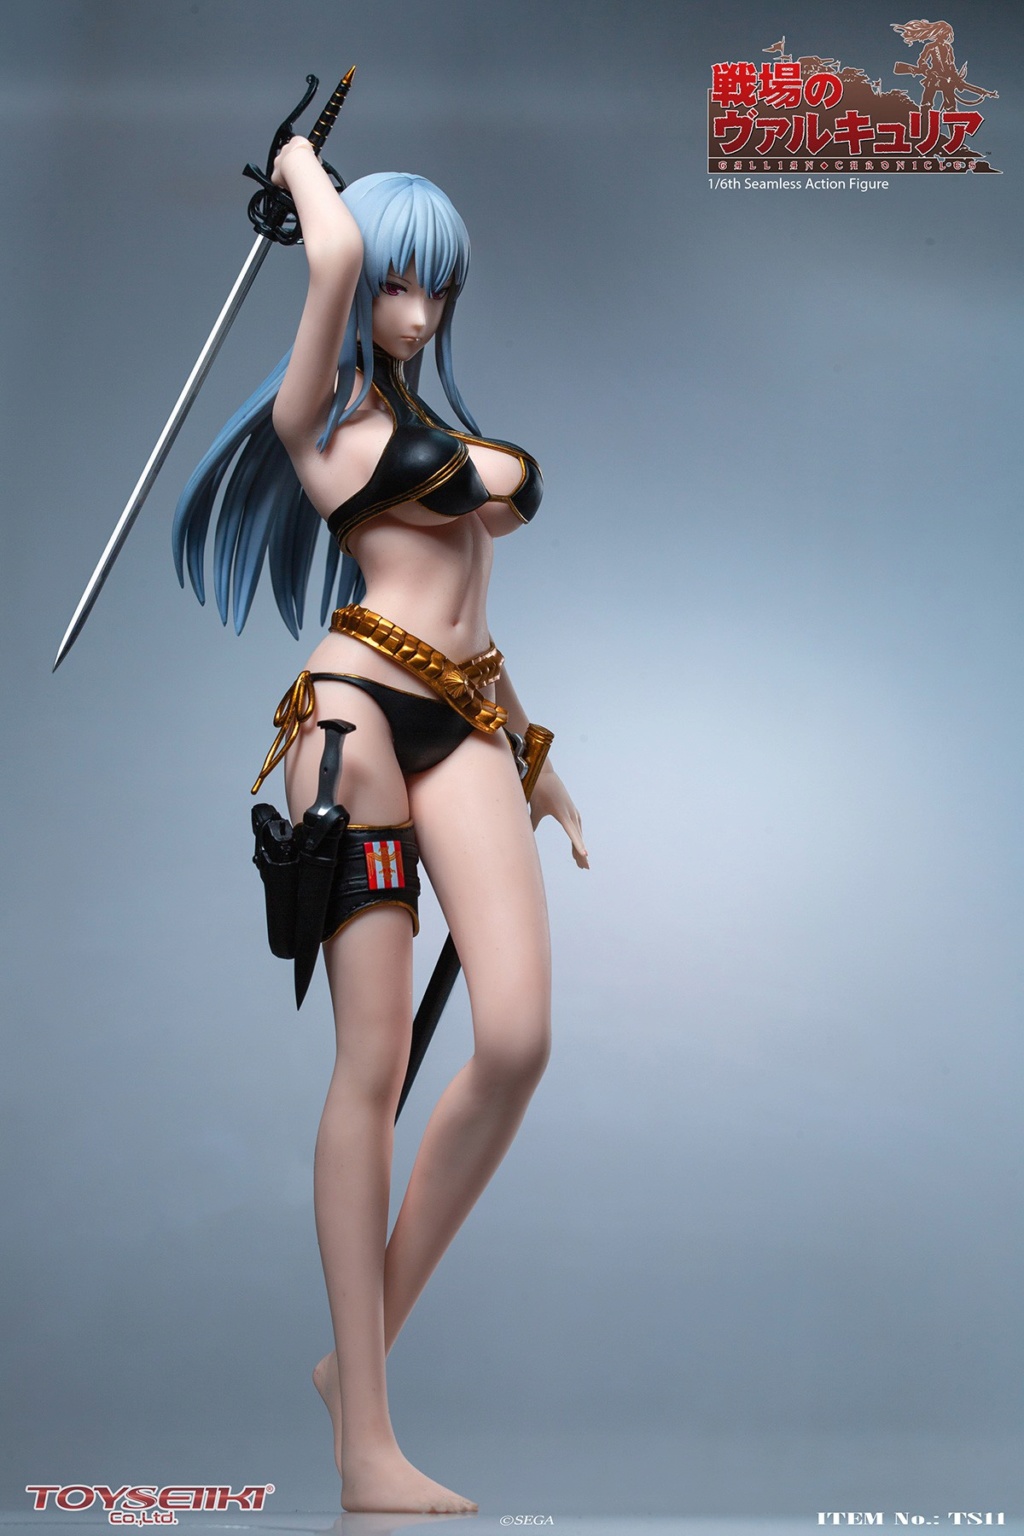 SelvariaBles - NEW PRODUCT: TOYSEIIKI: 1/6 "The Valkyrie of the Battlefield"- Selvaria Bles Action Figure (# TS11) 12000210